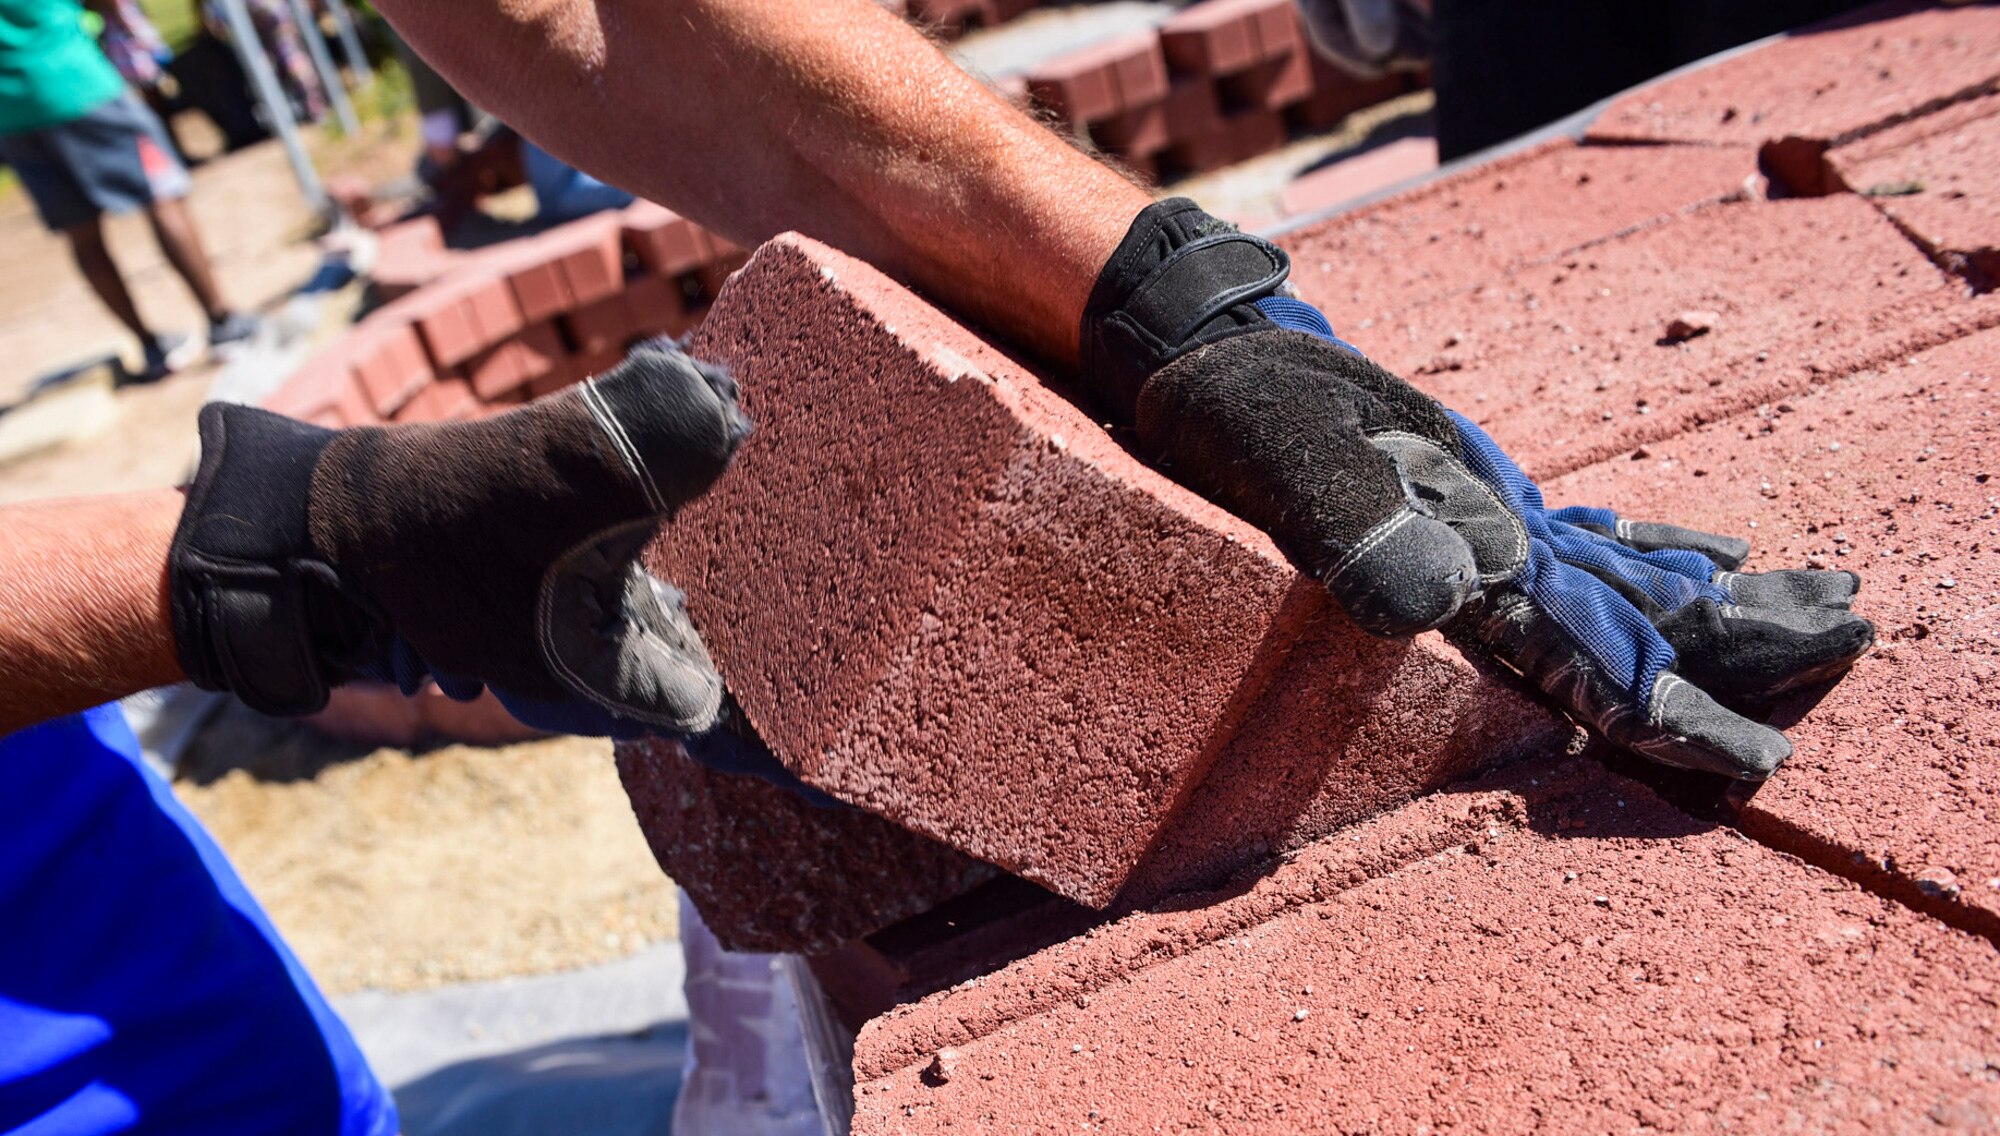 A volunteer removes a brick between J.E. Manch and Zel & Mary elementary schools, May 12, 2017. More than 150 community members gathered to build a neighborhood garden. The garden will serve as an outdoor classroom for students to learn about the importance of nutrition and growing fruits and vegetables. (U.S. Air Force photo by Airman 1st Class Andrew D. Sarver/Released)